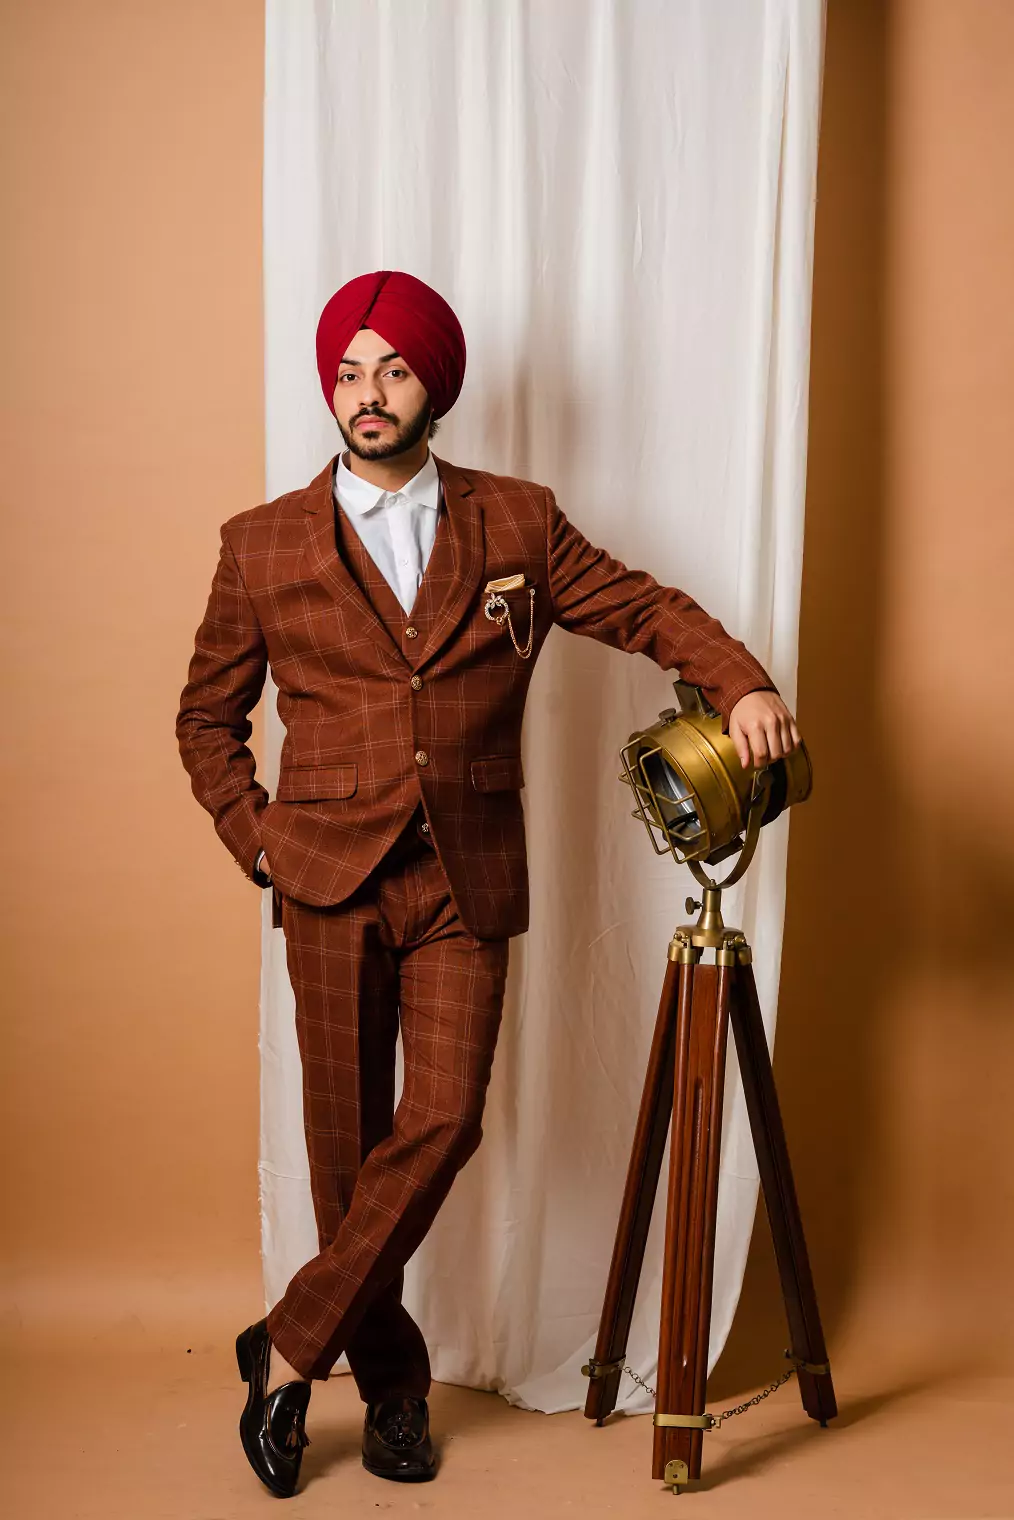 Shop Suits for Men in India - Choose Suit Size, Fabric, Pattern and Color